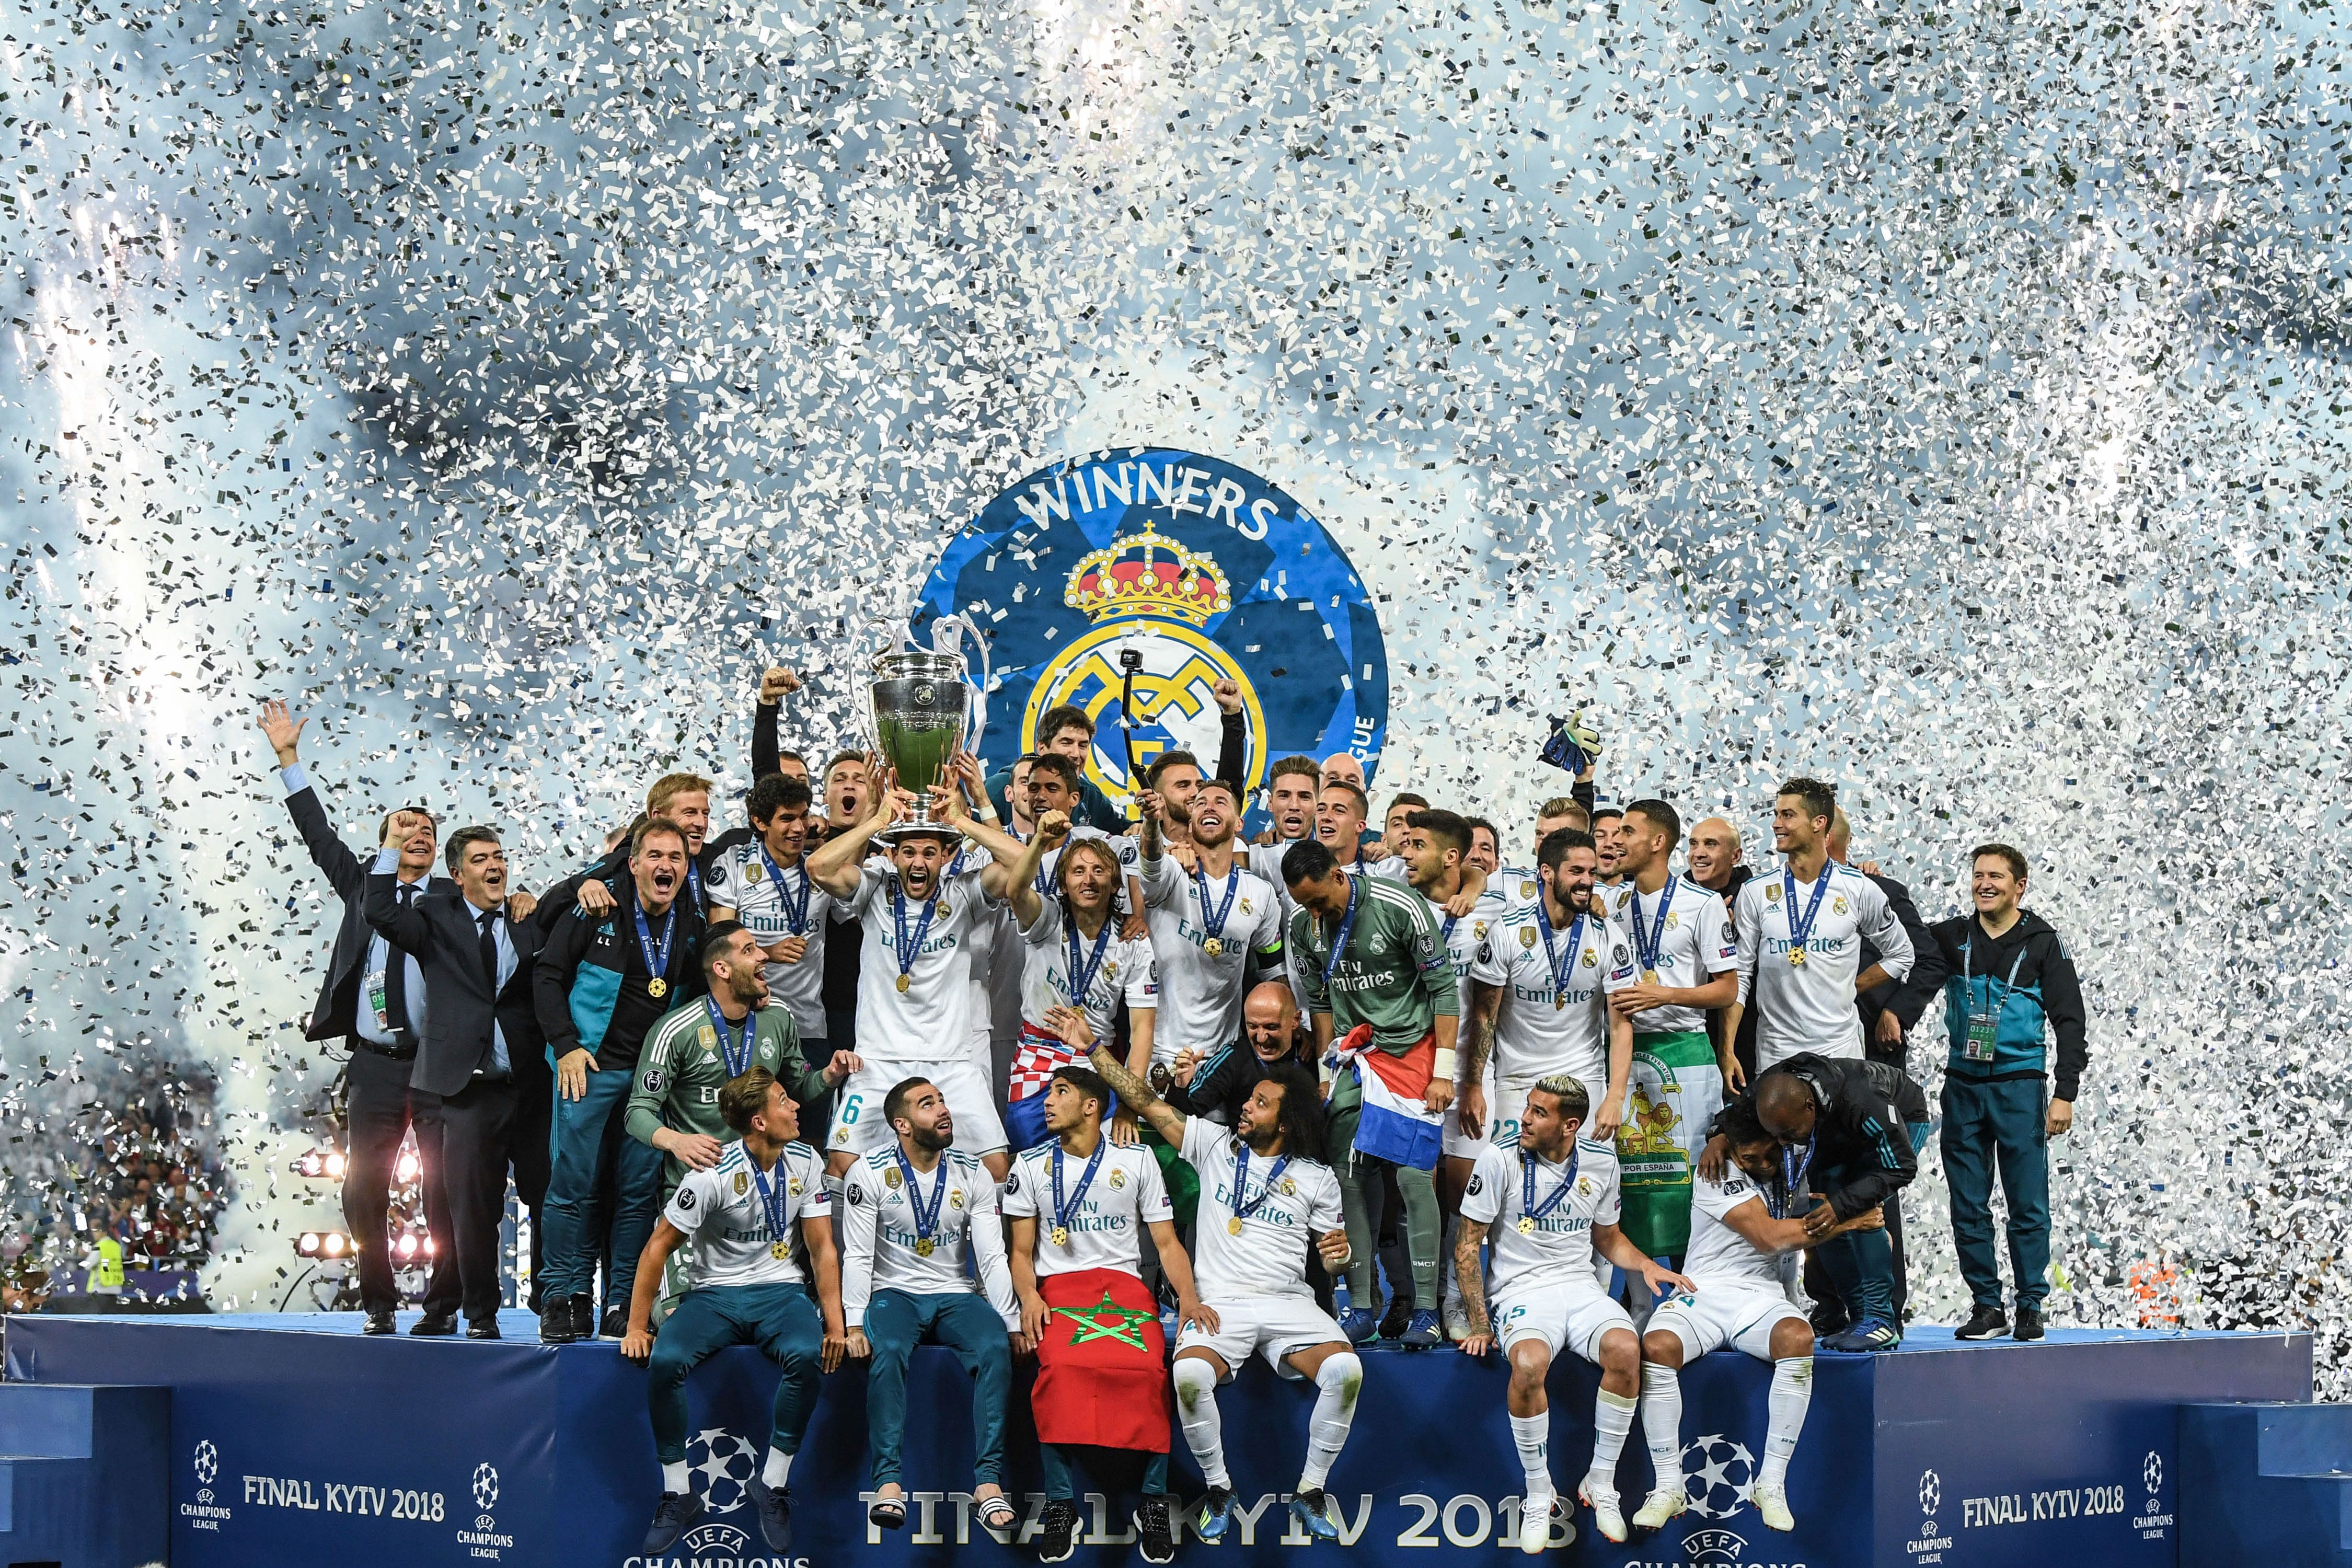 Real Madrid have the most continental trophies in world football